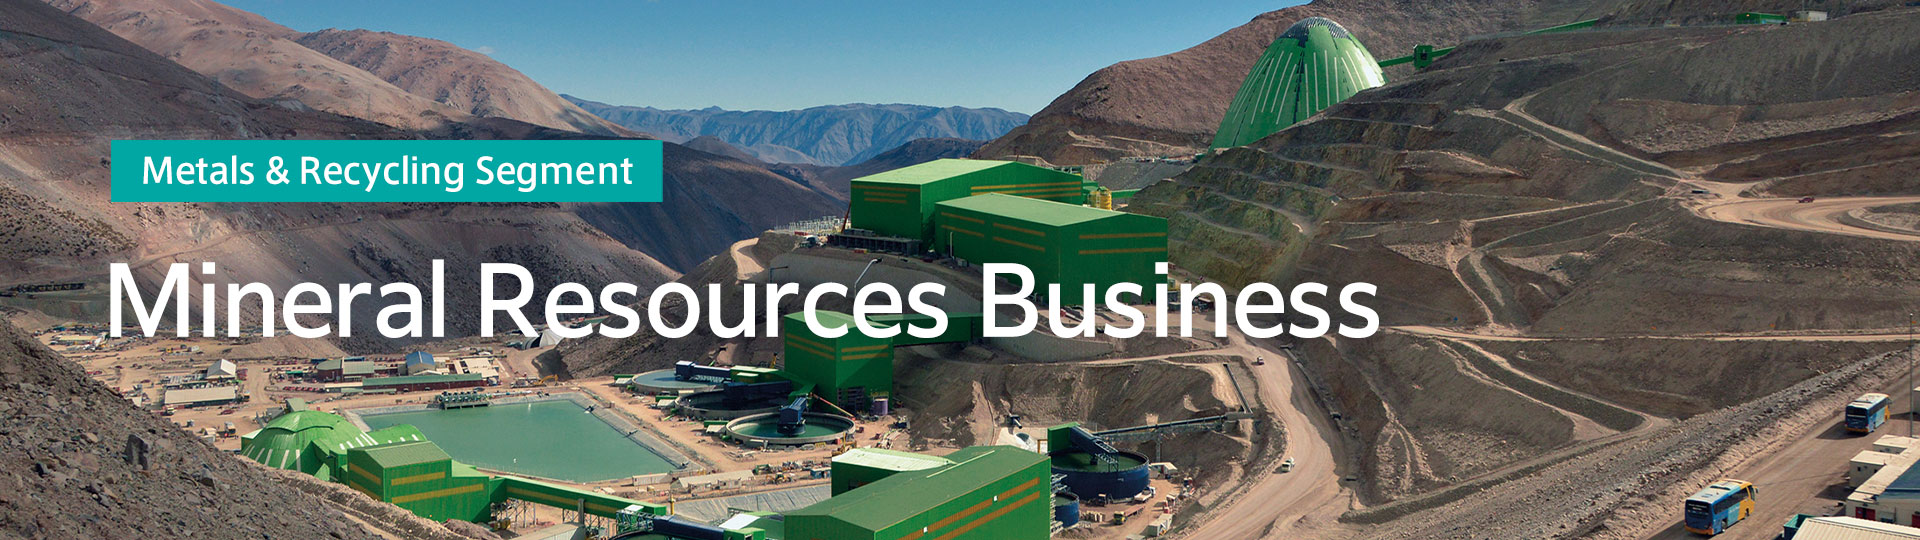 Metals & Recycling Segment Mineral Resources Business